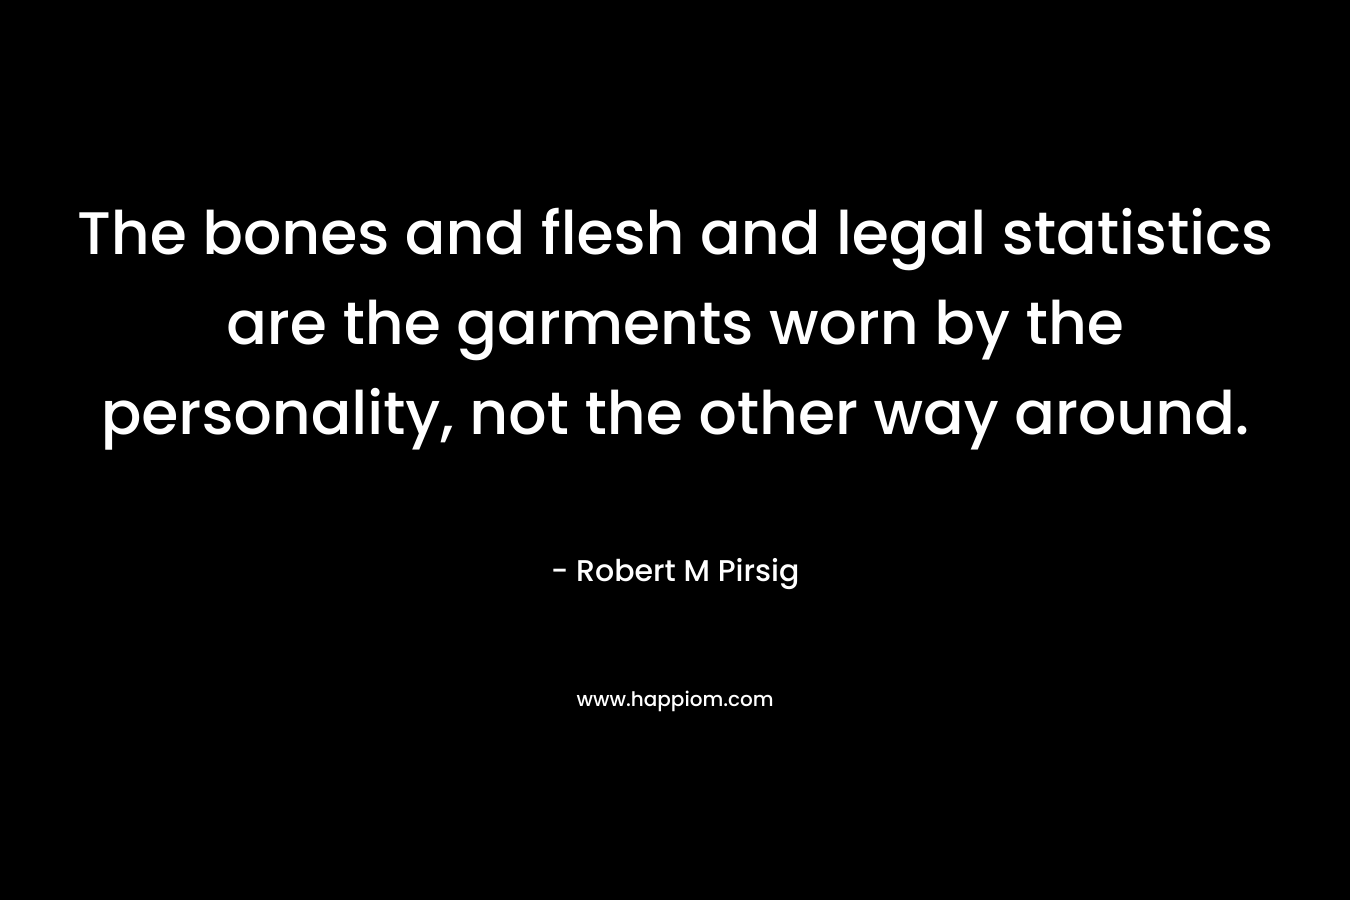 The bones and flesh and legal statistics are the garments worn by the personality, not the other way around. – Robert M Pirsig